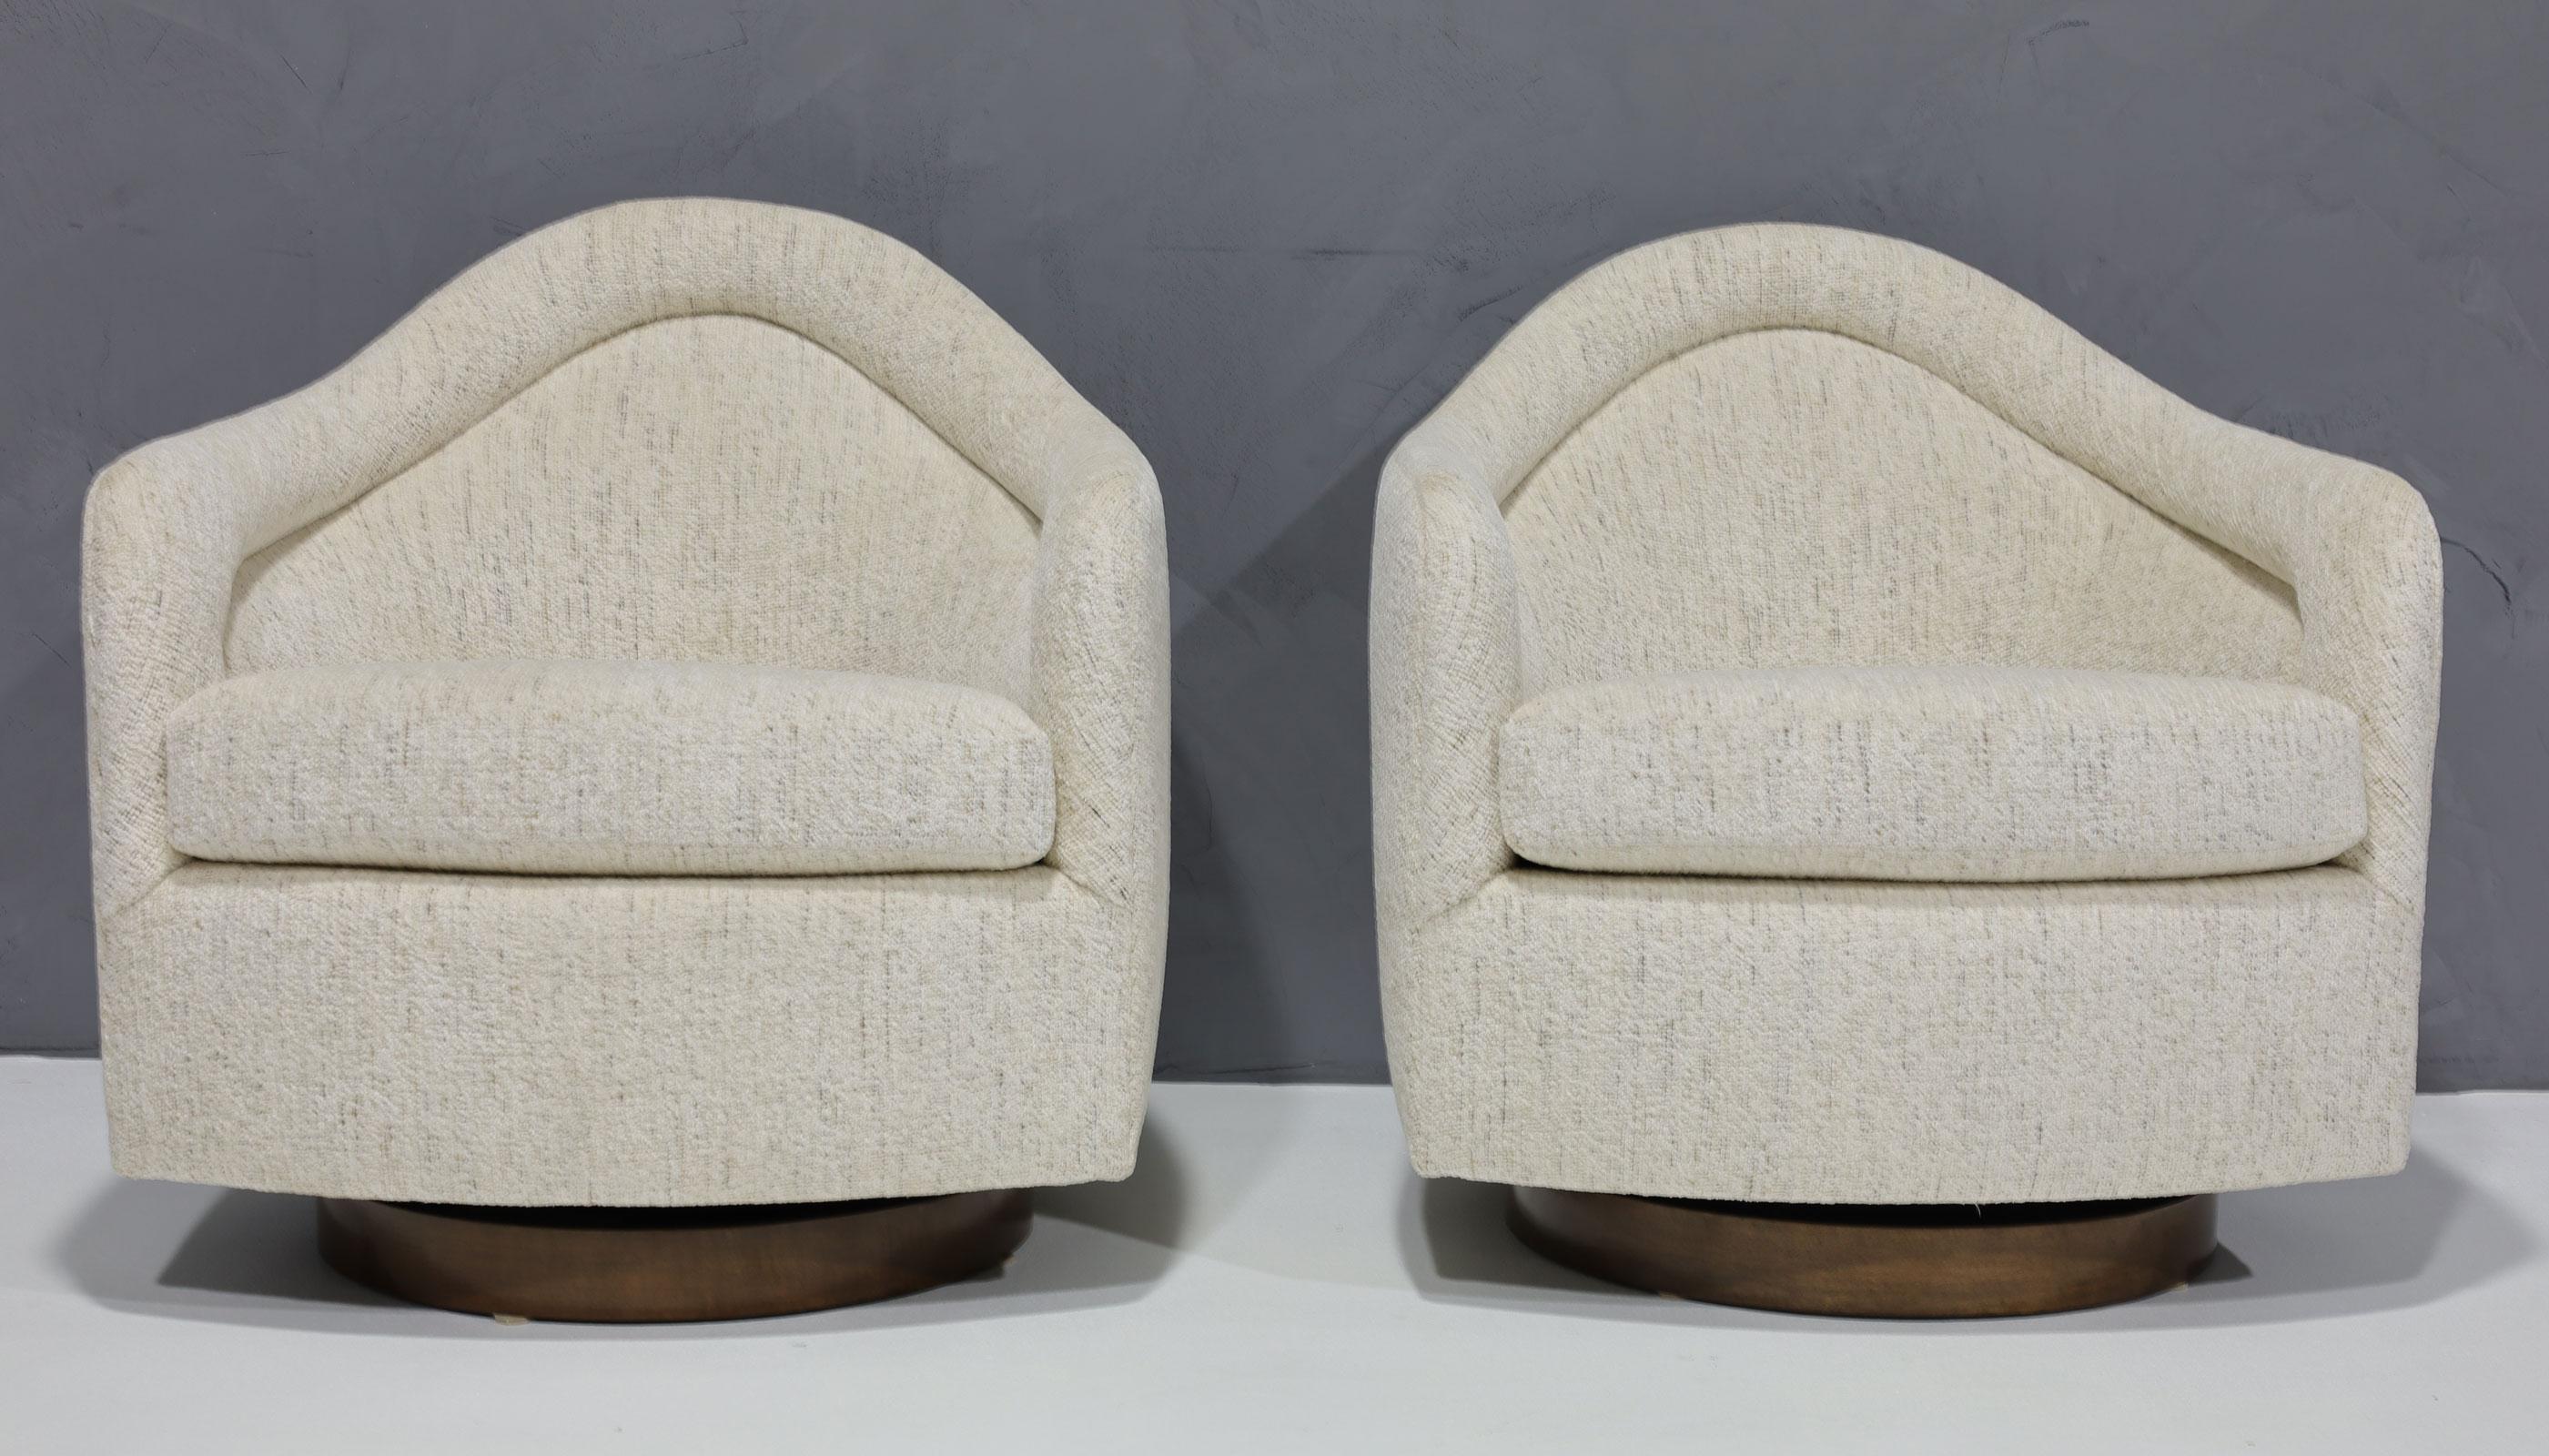 Super comfortable tilt/swivel chairs by Milo Baughman. Many love the higher back for support. We have reupholstered in a high quality chenille which is principally soft white with specs of black and brown throughout. The bases have new veneer in